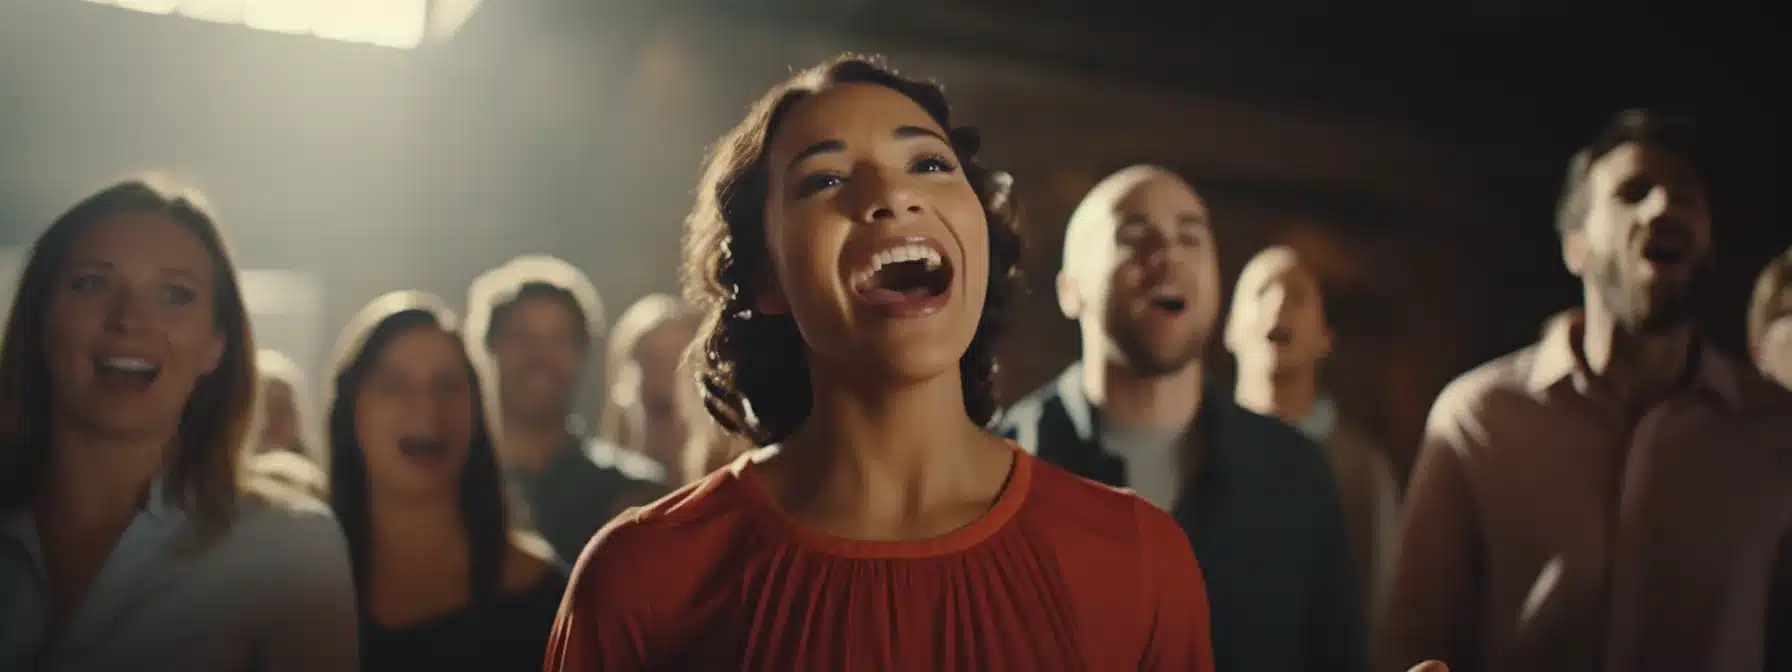 a group of individuals standing in a choir formation, singing together with joyful expressions on their faces.